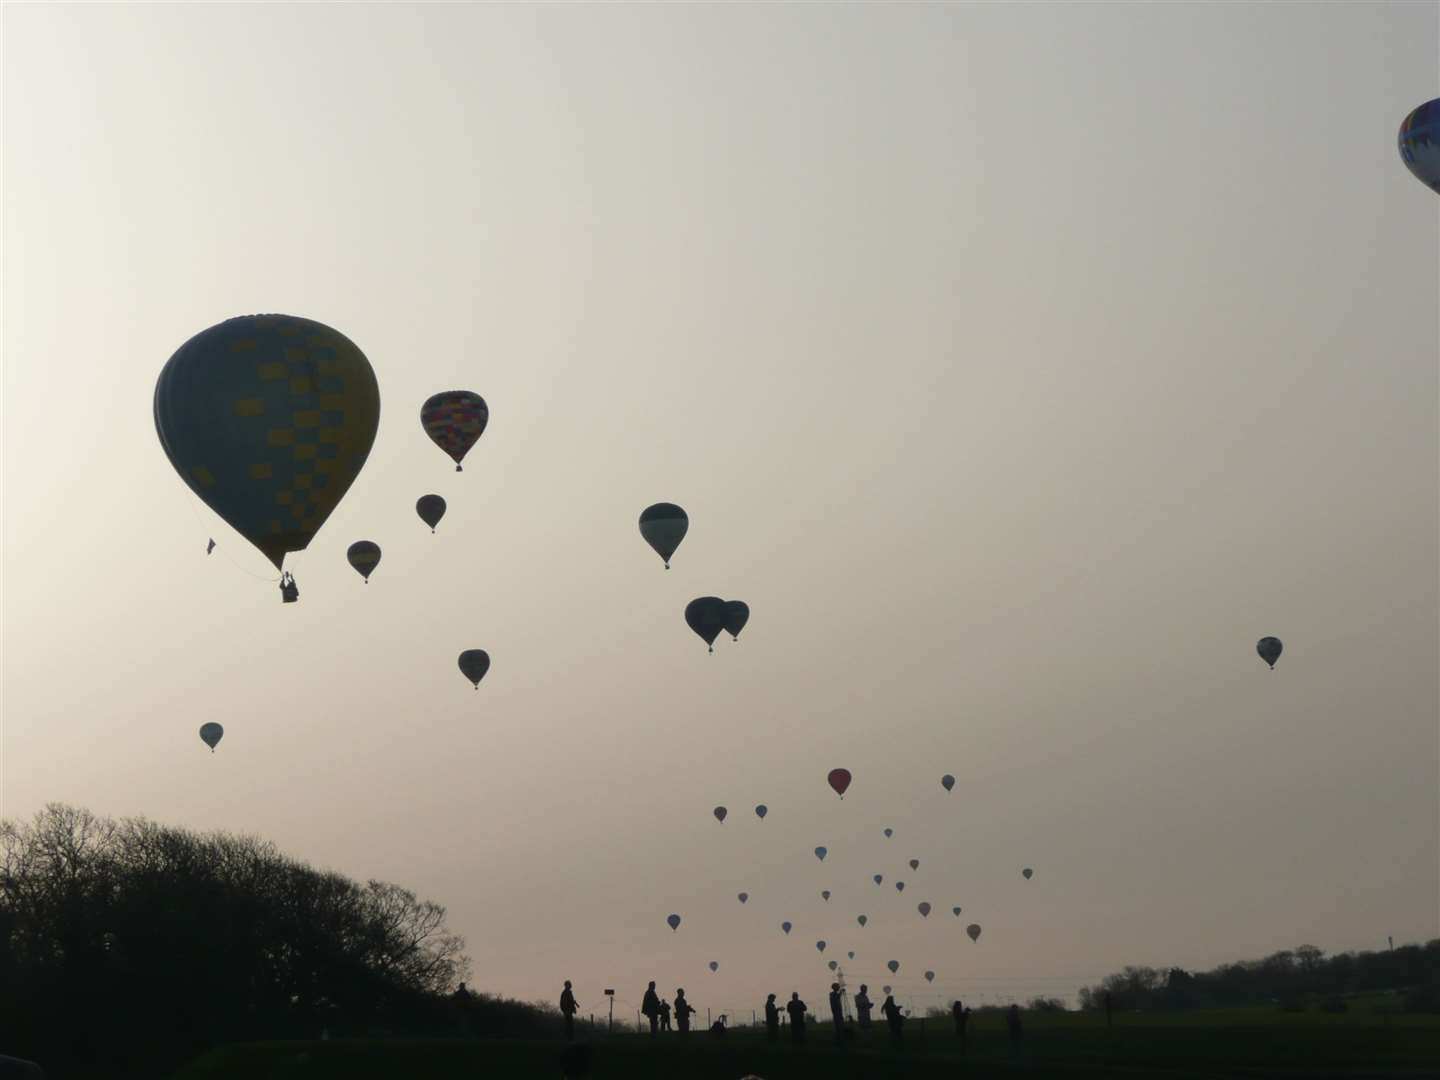 The record-breaking 2011 hot air balloon crossing of the Channel